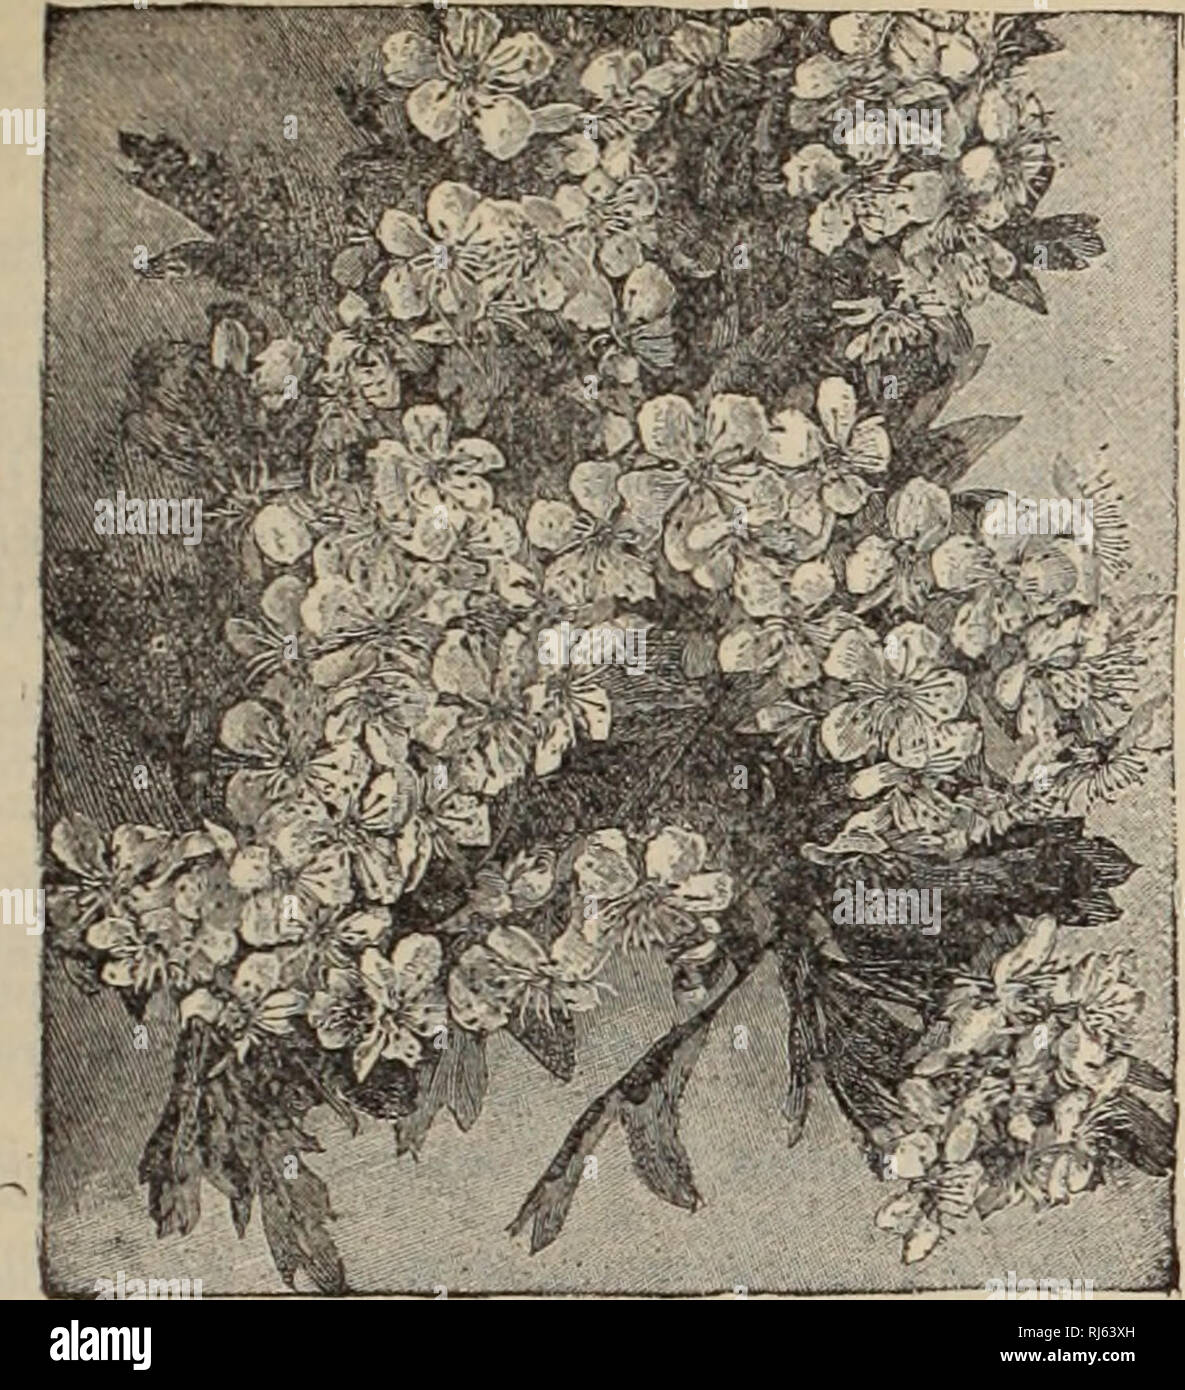 . Choice hardy trees and plants / F.W. Kelsey Nursery Company.. Nursery Catalogue. Catalogue of Hardy Trees, Shrubs, Etc. 31. Chataegus or Flowering Thorn. DEUTZIA crenata aurea variegata. Golden Variegated Detjtzia. A new golden-leaved variety of Gracilis. .3.5 cts. DEUTZIA crenata. Pride of Rochester. Large double white flowers, back of petals slight- ly tinted with rose; a profuse bloomer, largej flowers. 3.5 cts. DEUTZIA gracilis. Slender-Branched Deut- ziA. Pure white, handsome flowers. 2.5 and 3.5 cts.; low rates per 10. DEUTZIA scabra. Rough-Leaved Deutzia. Profusion of white flowers. F Stock Photo